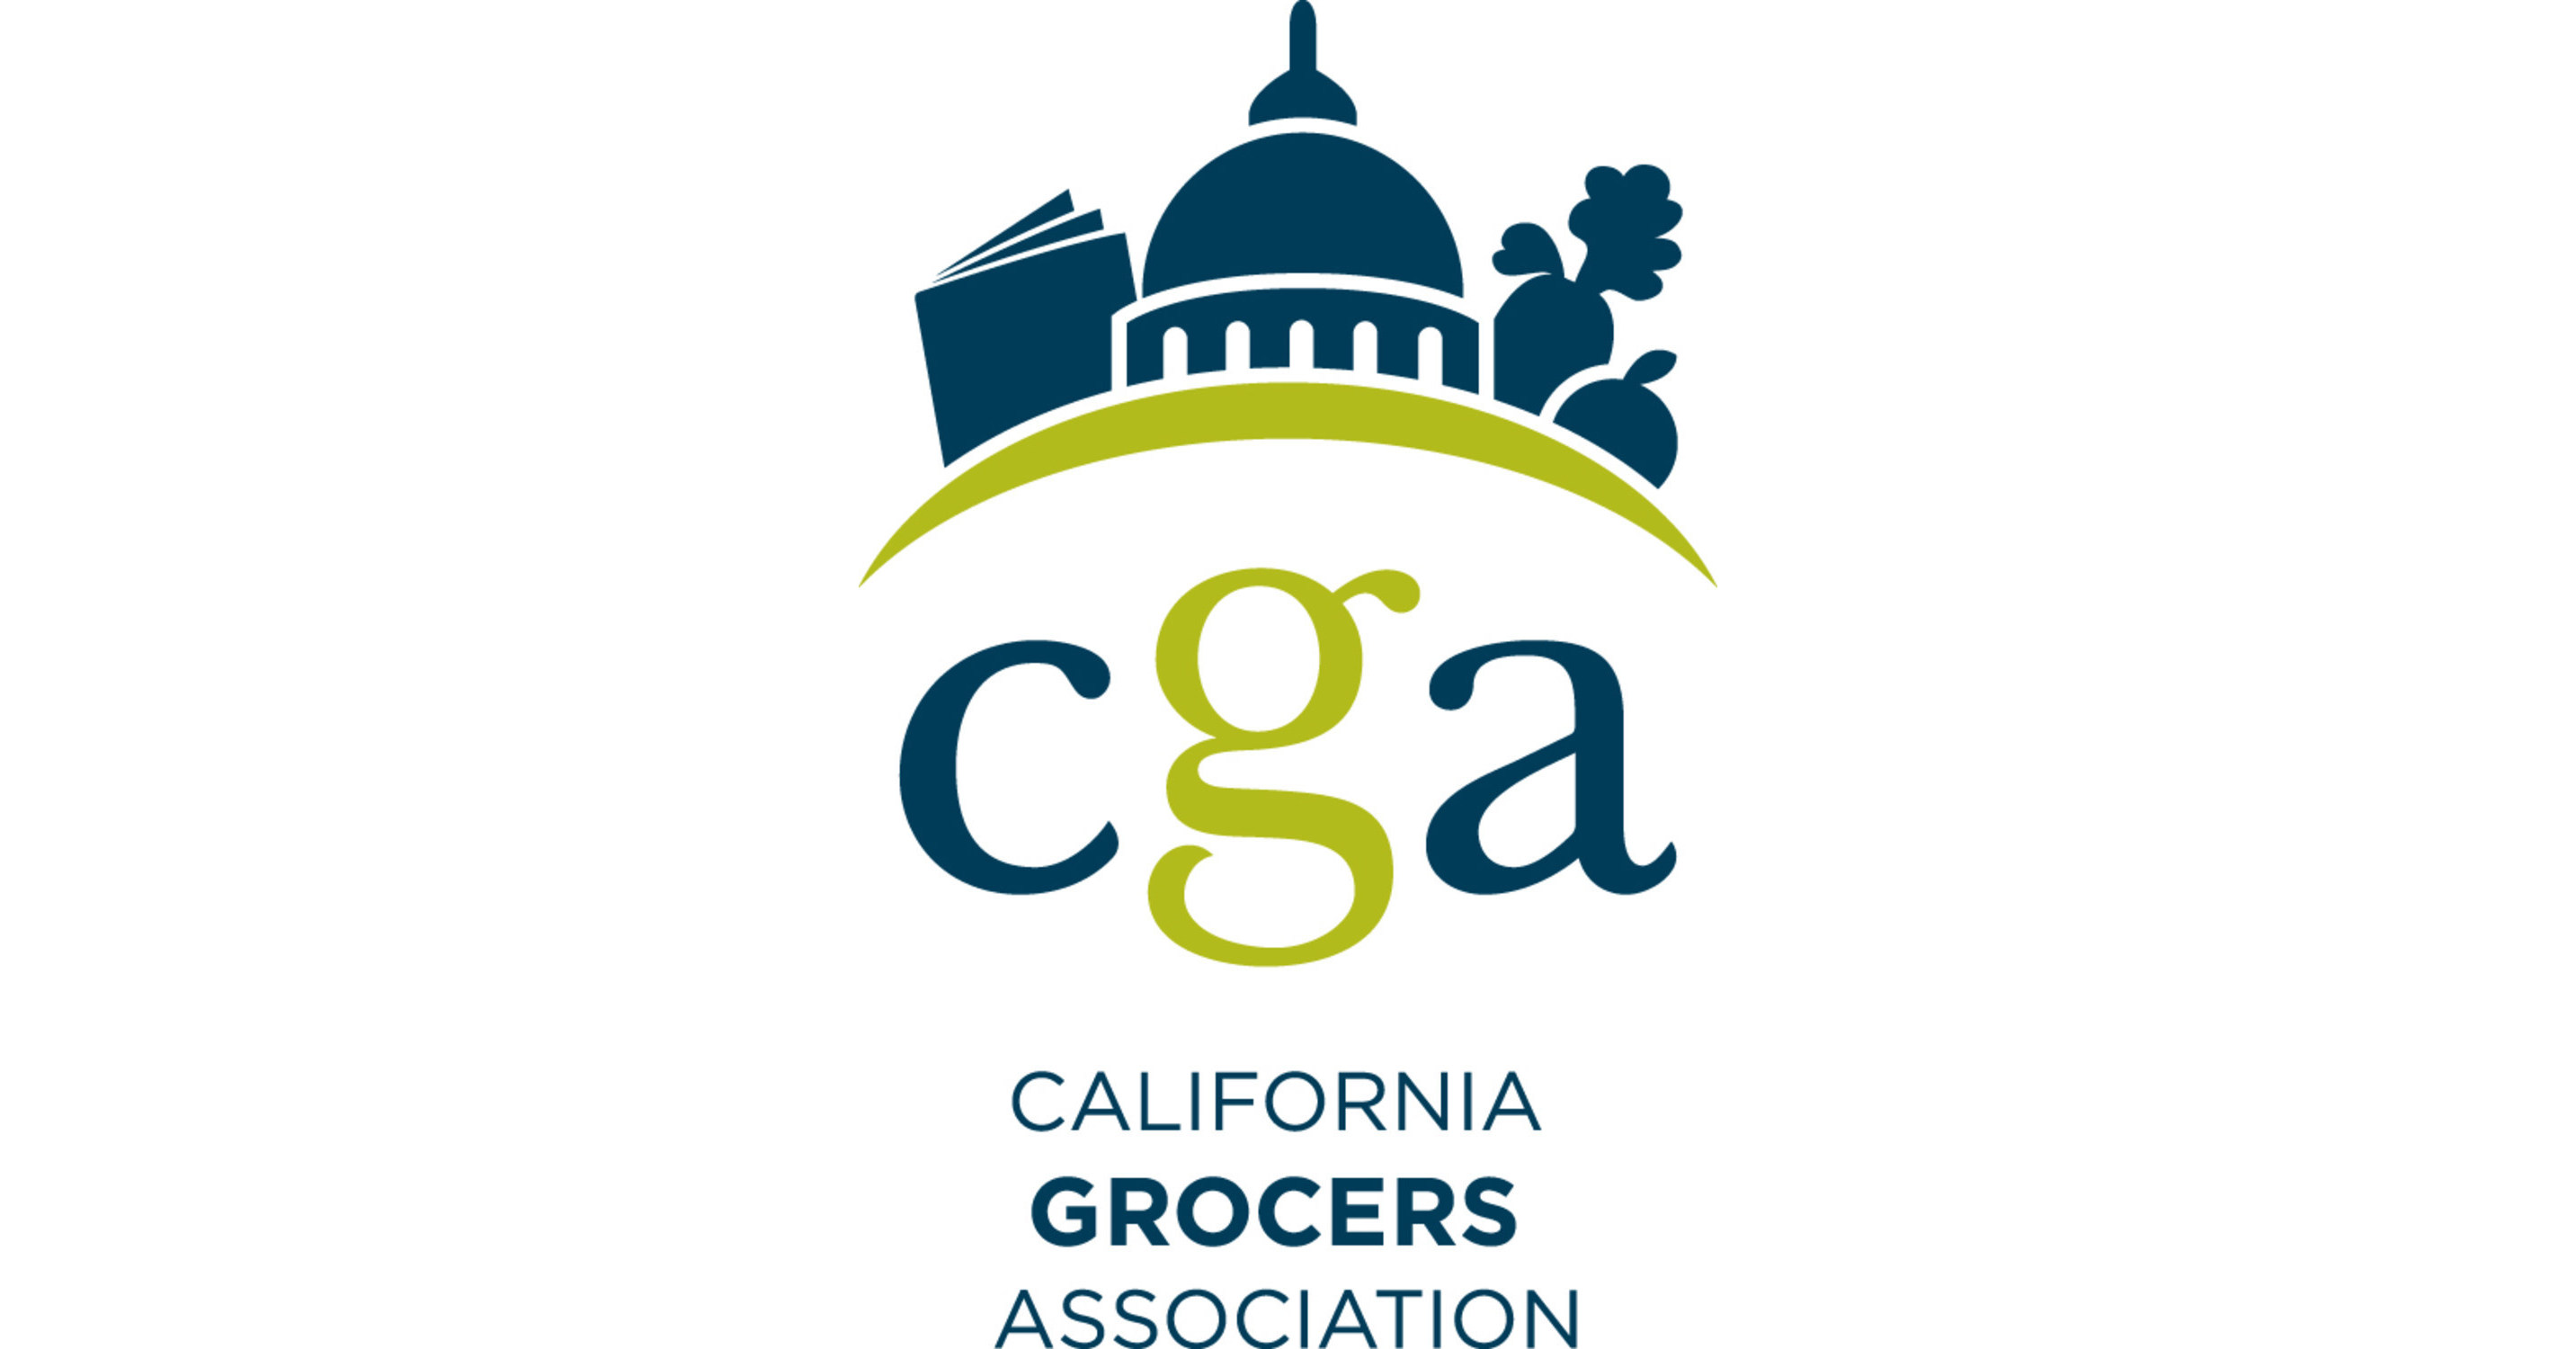 California Grocery Stores Assure Public There is plenty of food and